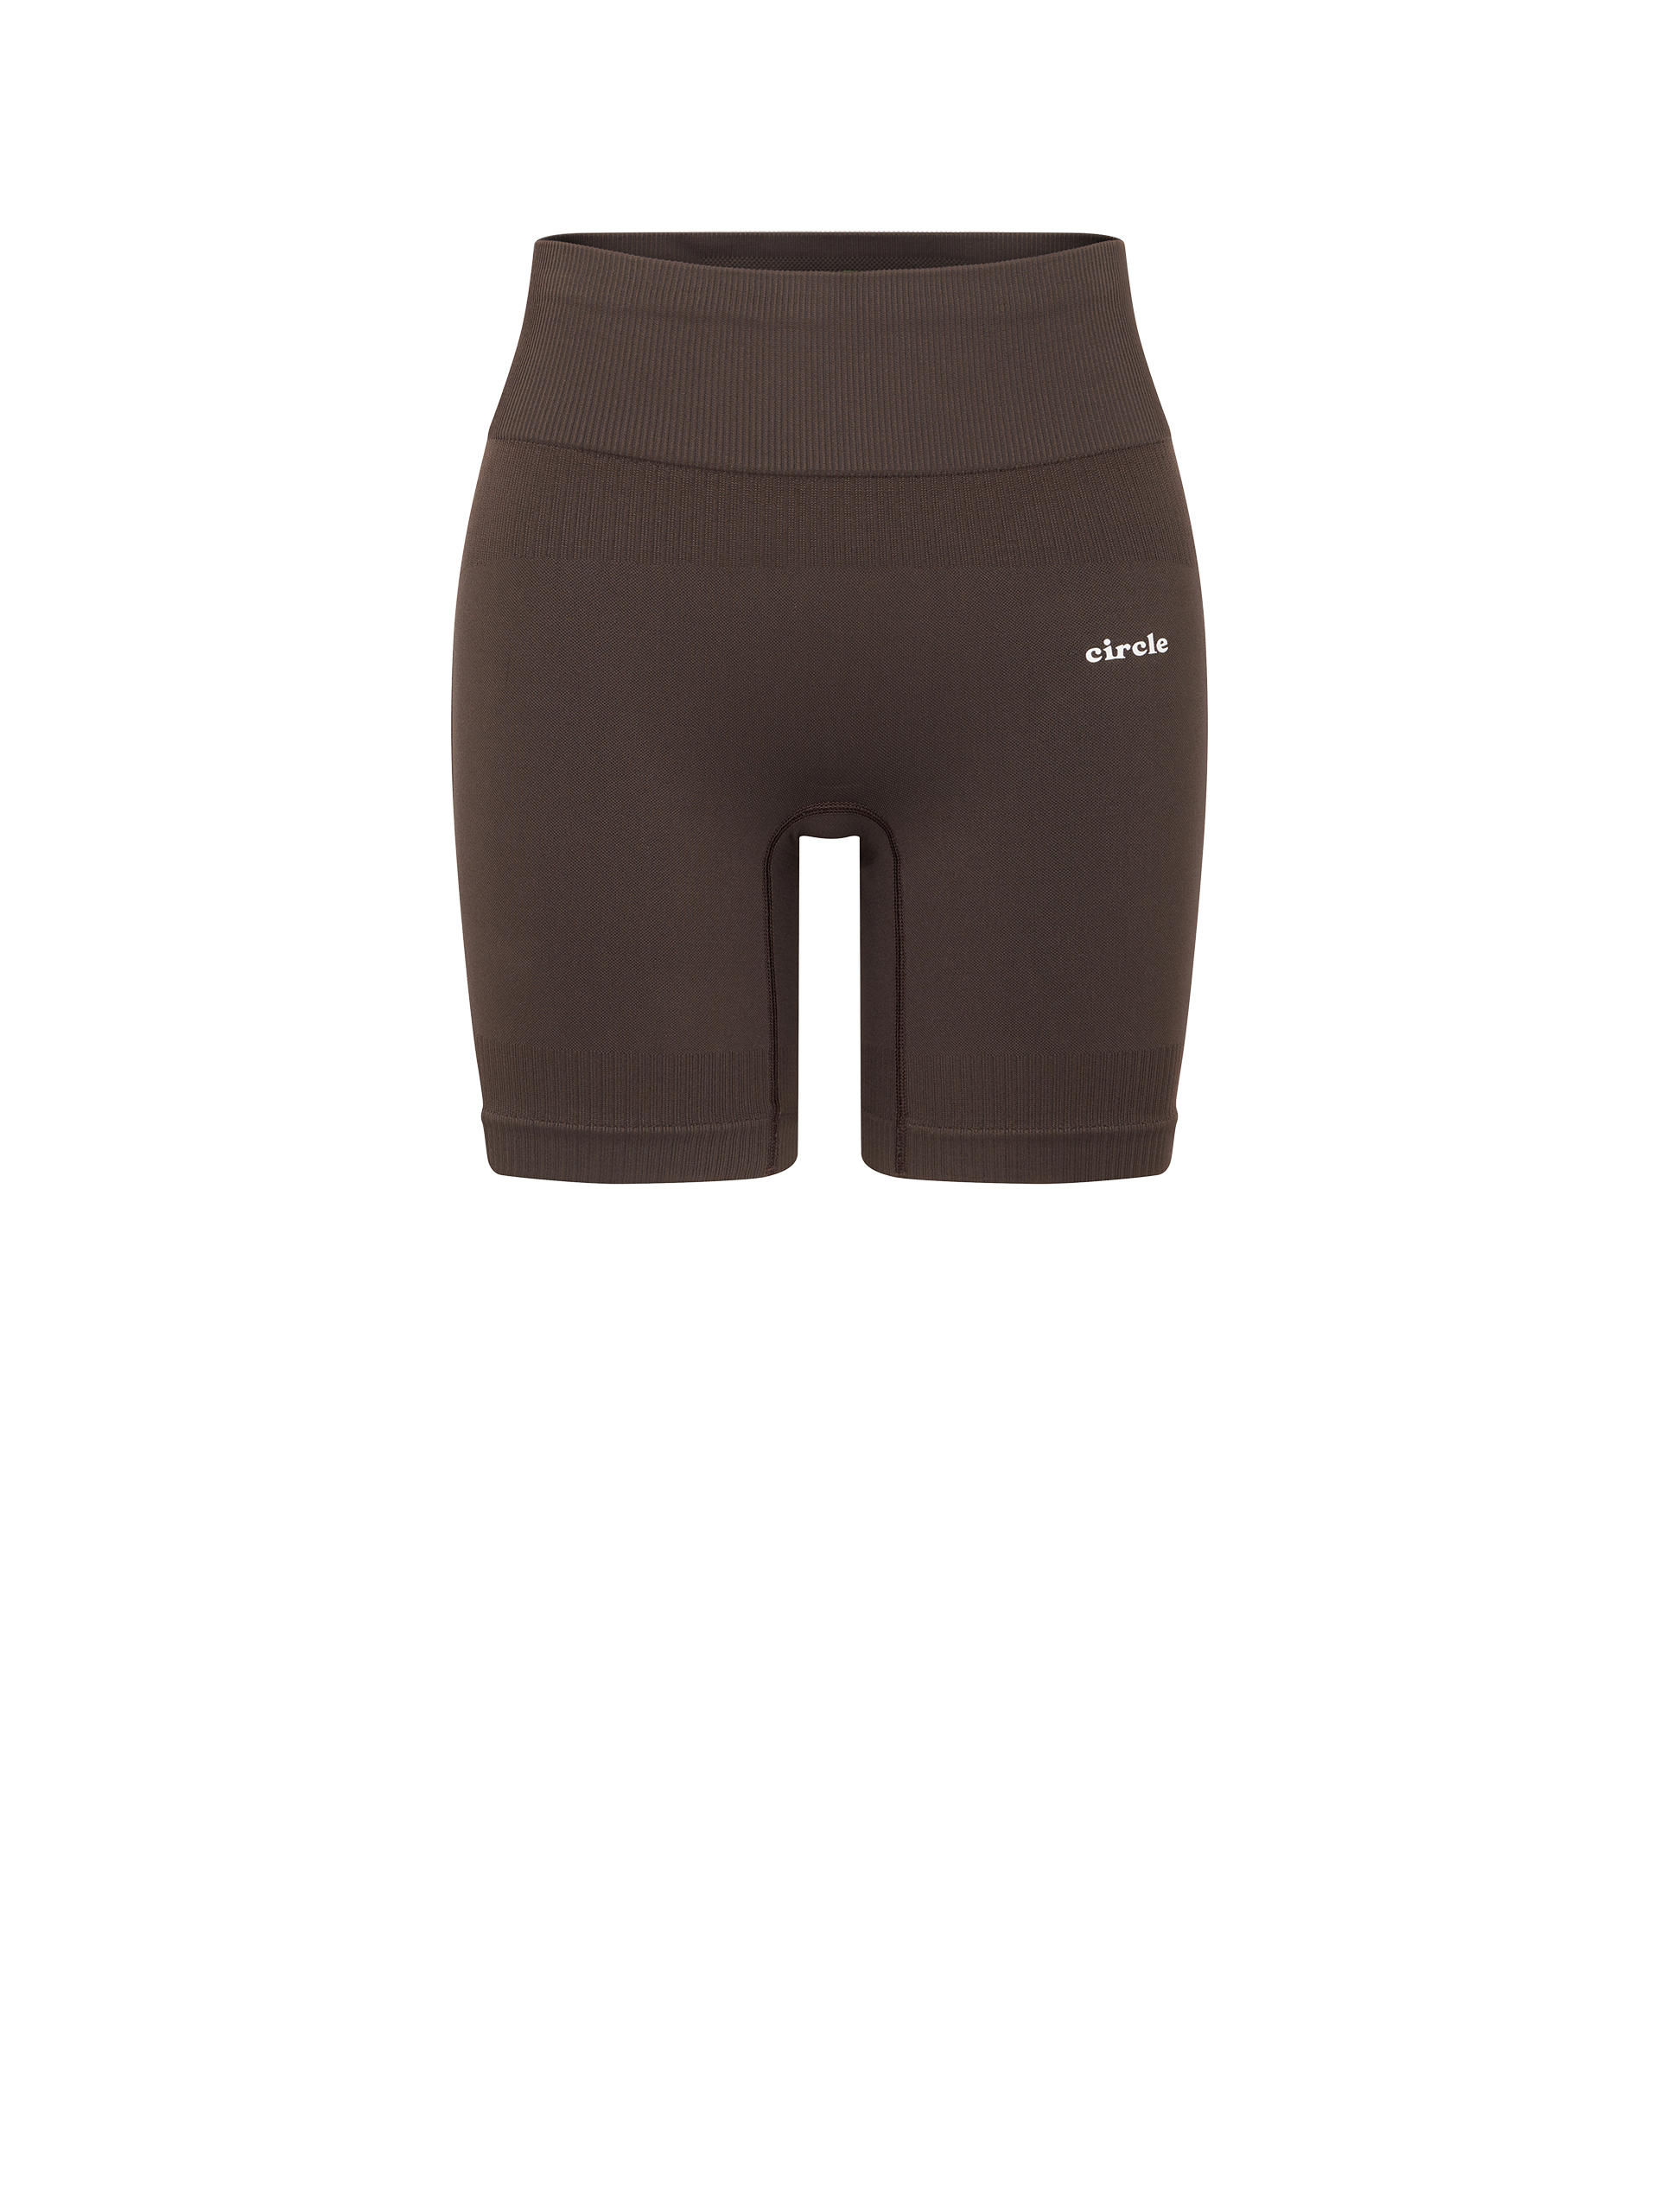 Seamless technology. Made from Q-NOVA recycled polyamide from Italy. Knitted stretch fabric, according to different areas of the body, with a technical mesh construction that maximizes performance. 